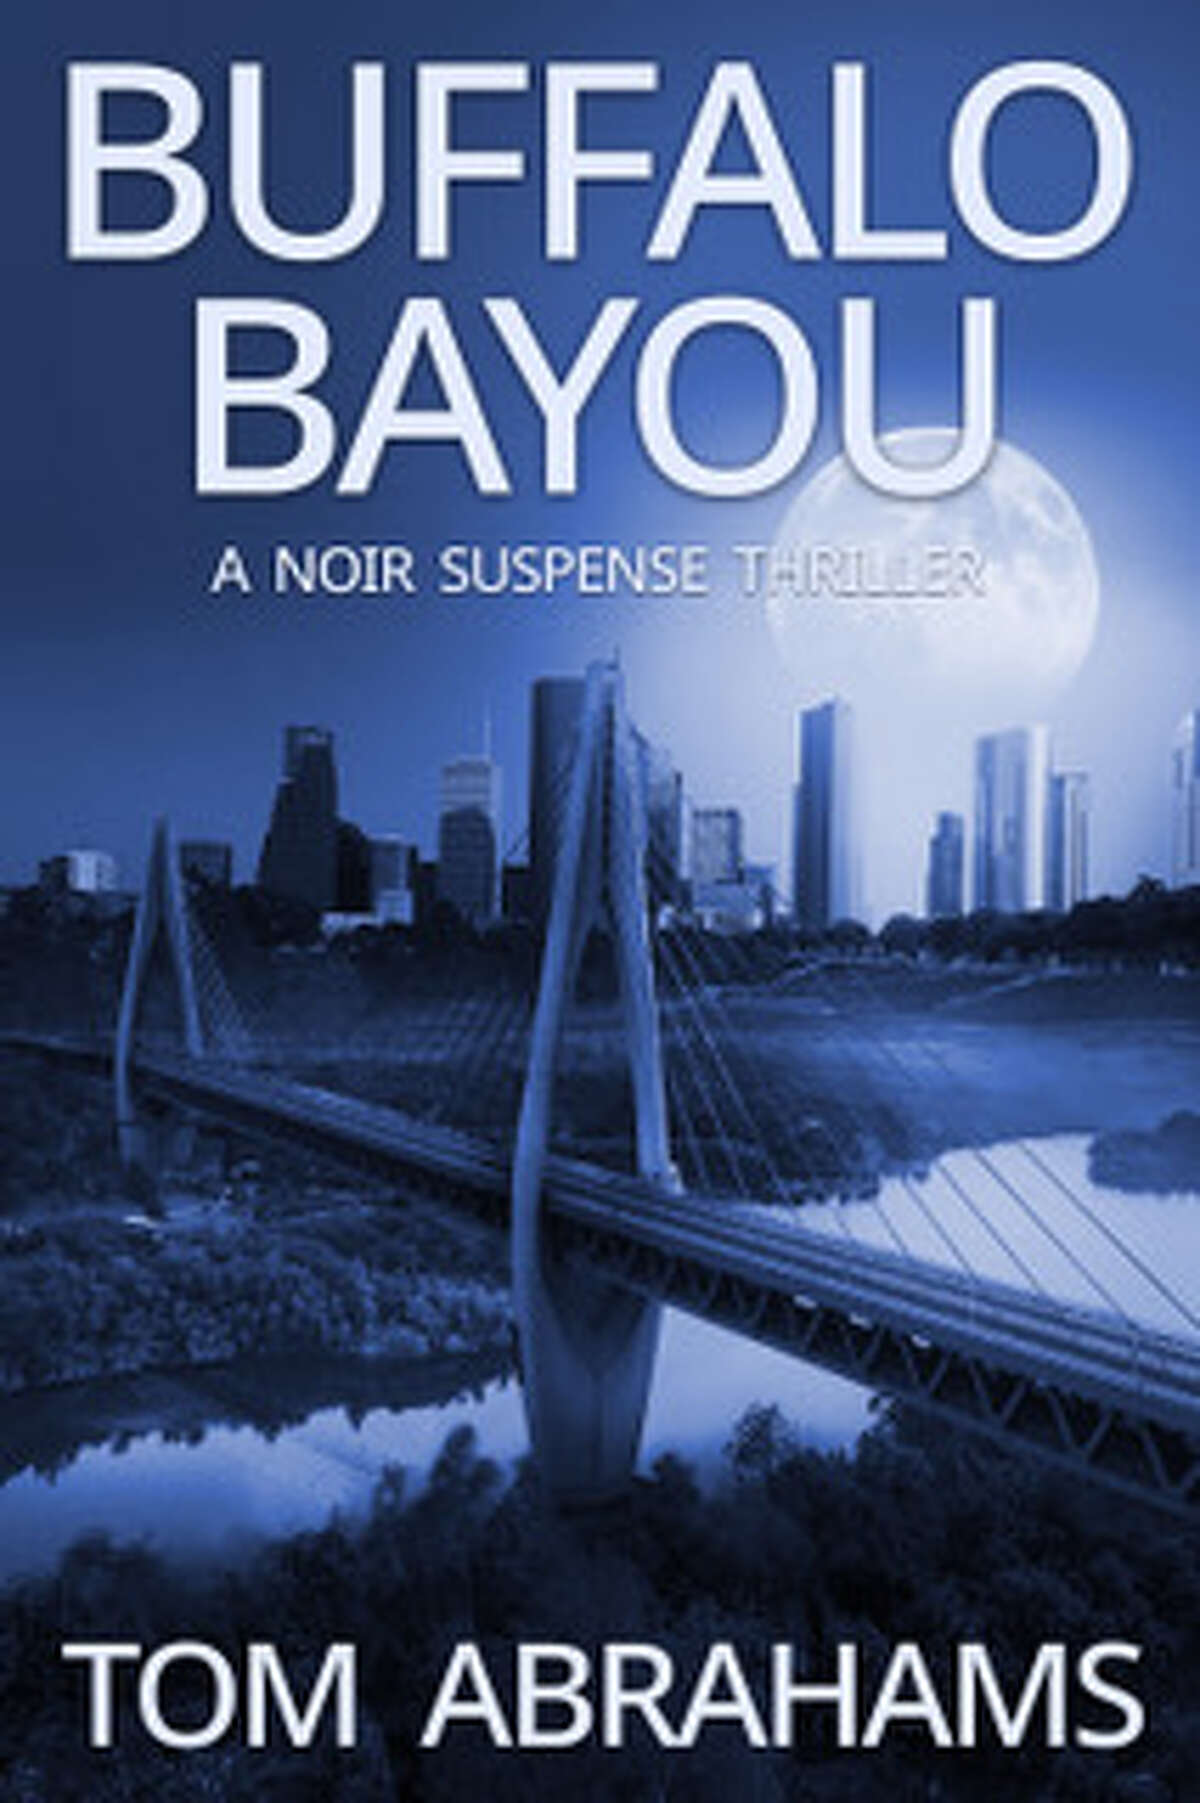 Tom Abrahams released his first novel in 2012. Since then, he’s written 31 more. His latest title, Buffalo Bayou, goes on sale later this month.   A noir thriller, Buffalo Bayou is set in present-day Houston. It follows John Druitt, a homicide detective with the Houston Police Department, during a spree of killings that make headline news.  